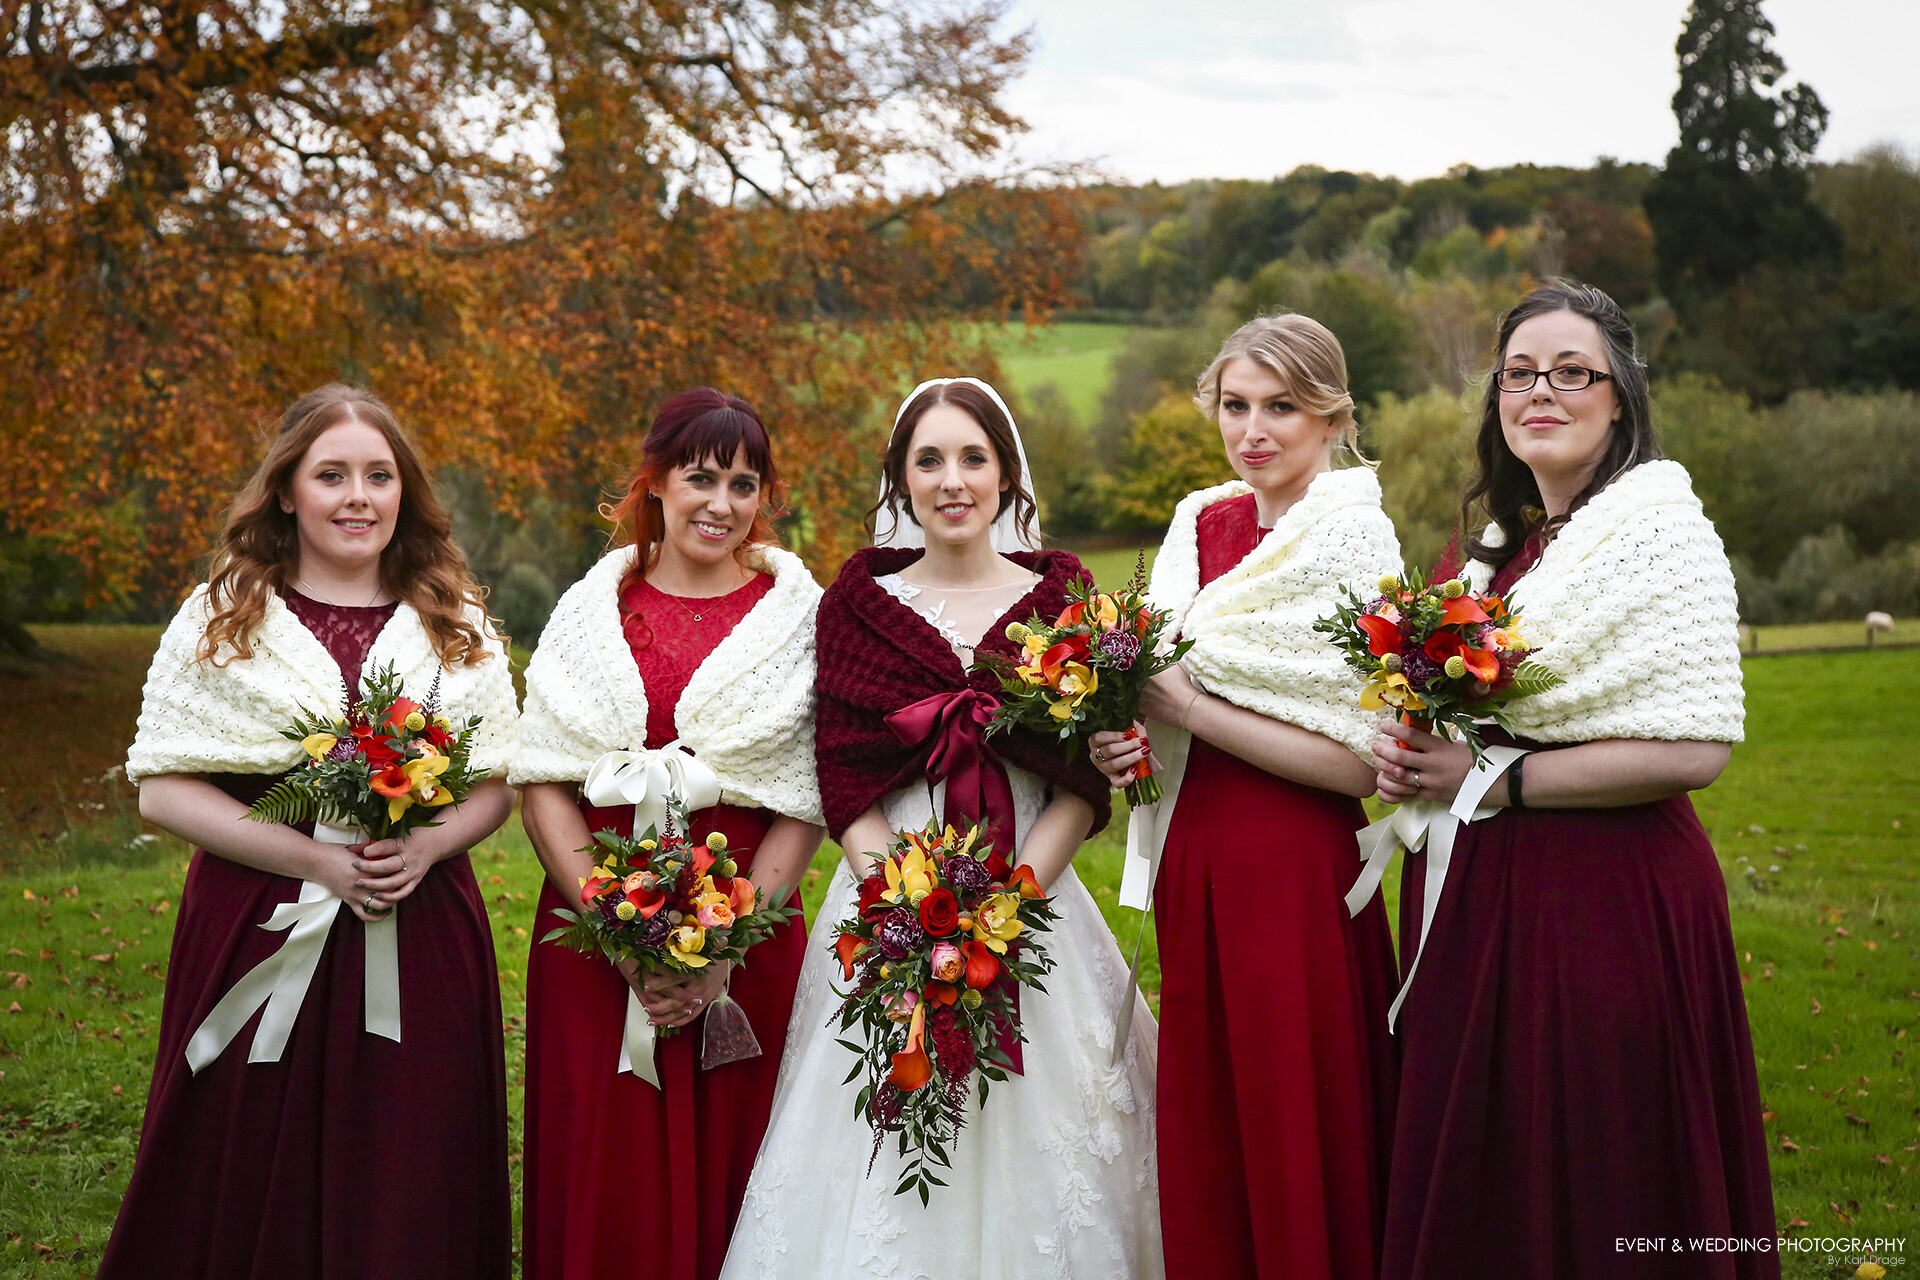 The Bride and her Bridesmaids at Bredenbury Court Barns